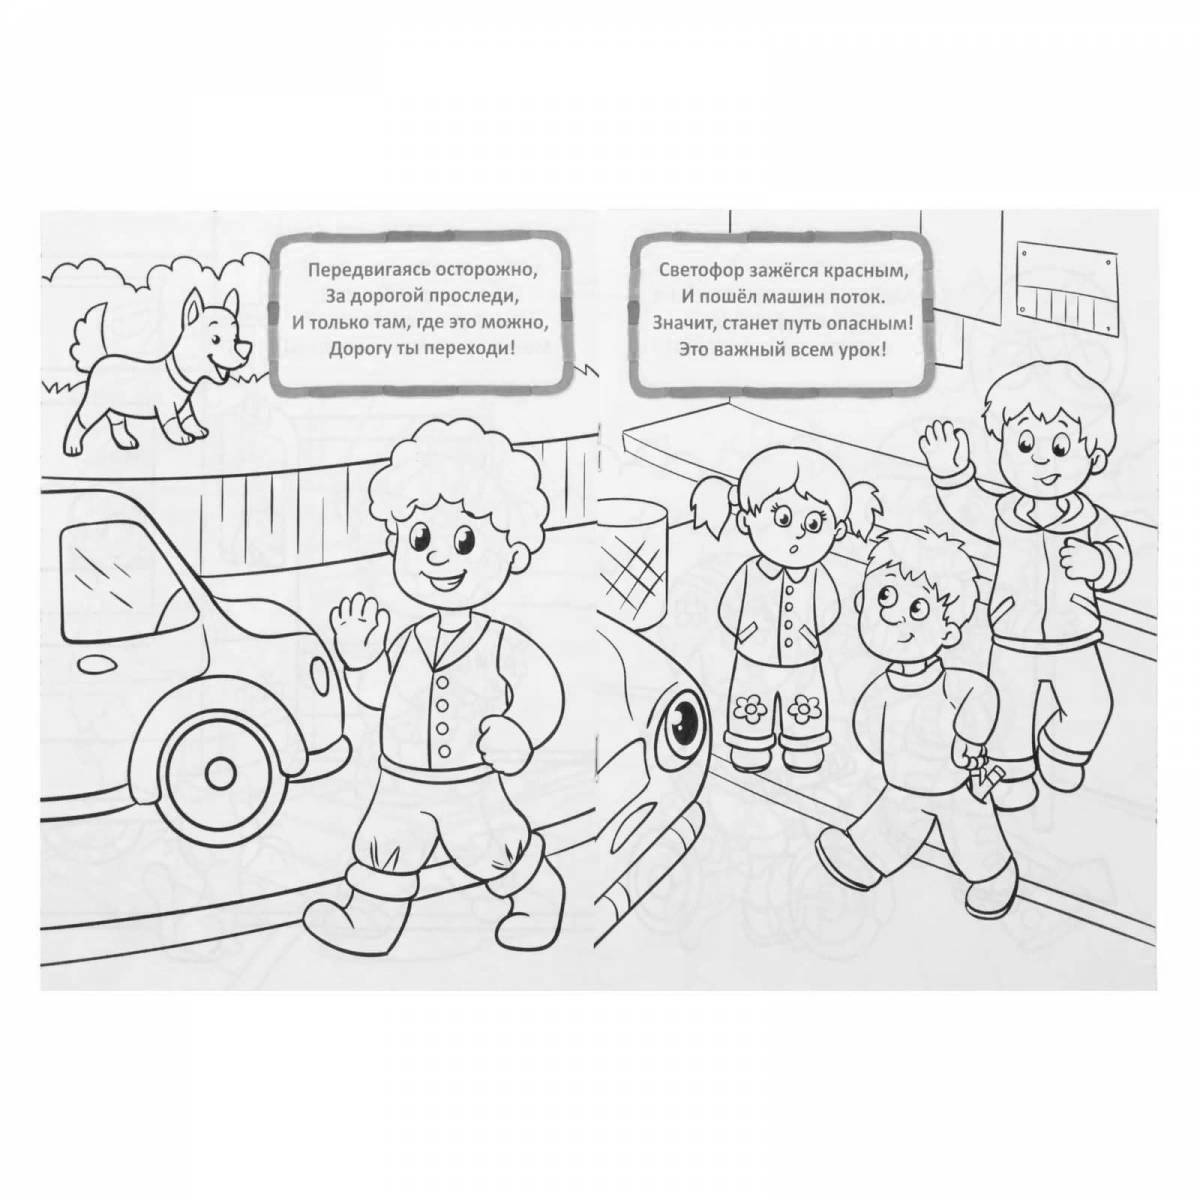 Excellent rules of the road 1st grade coloring book